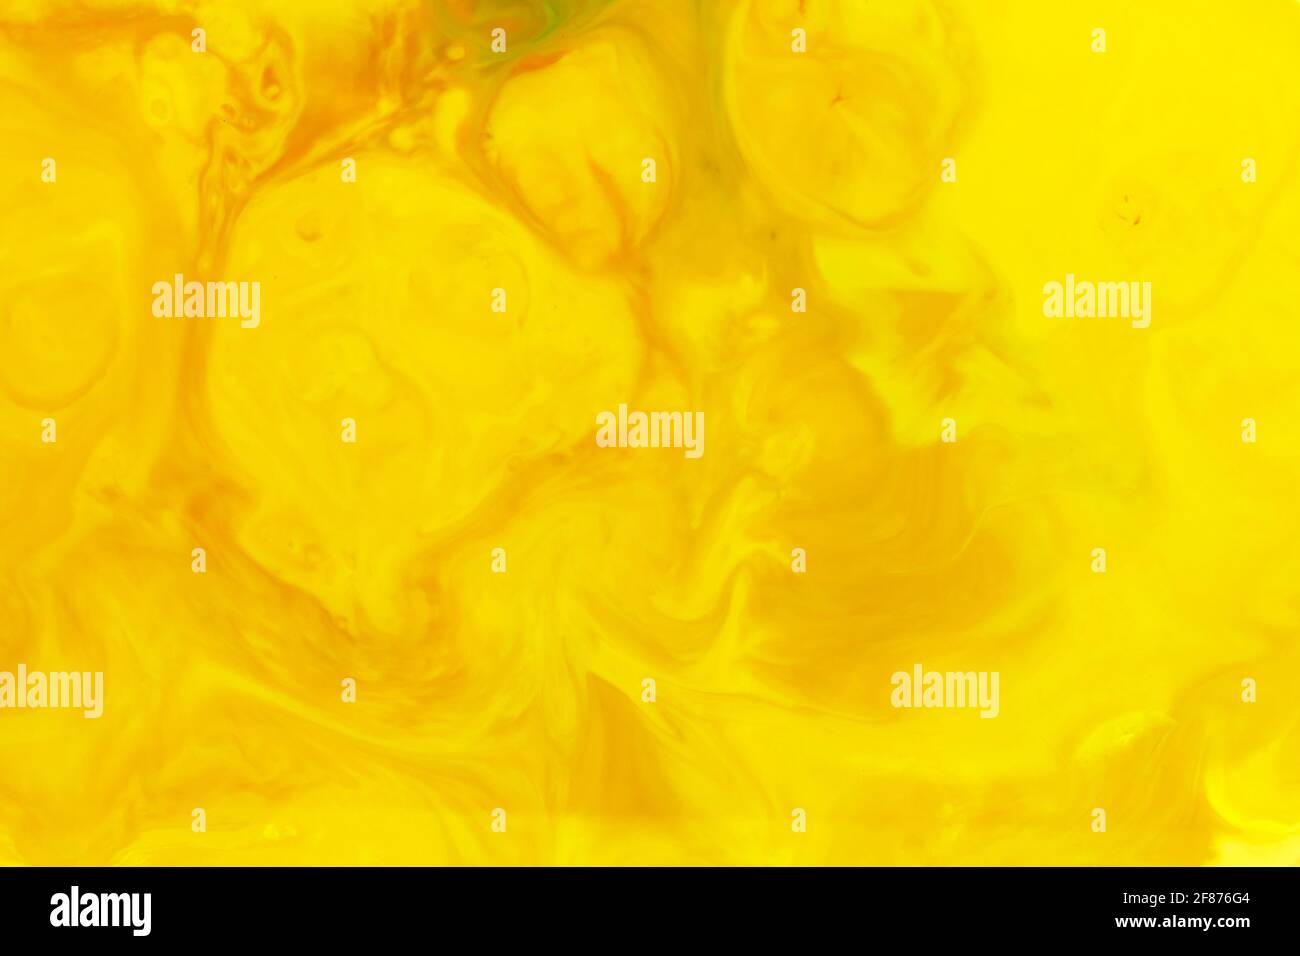 Vibrant yellow abstract amorphous background of swirling ink creating a random pattern in a full frame view for a design template Stock Photo